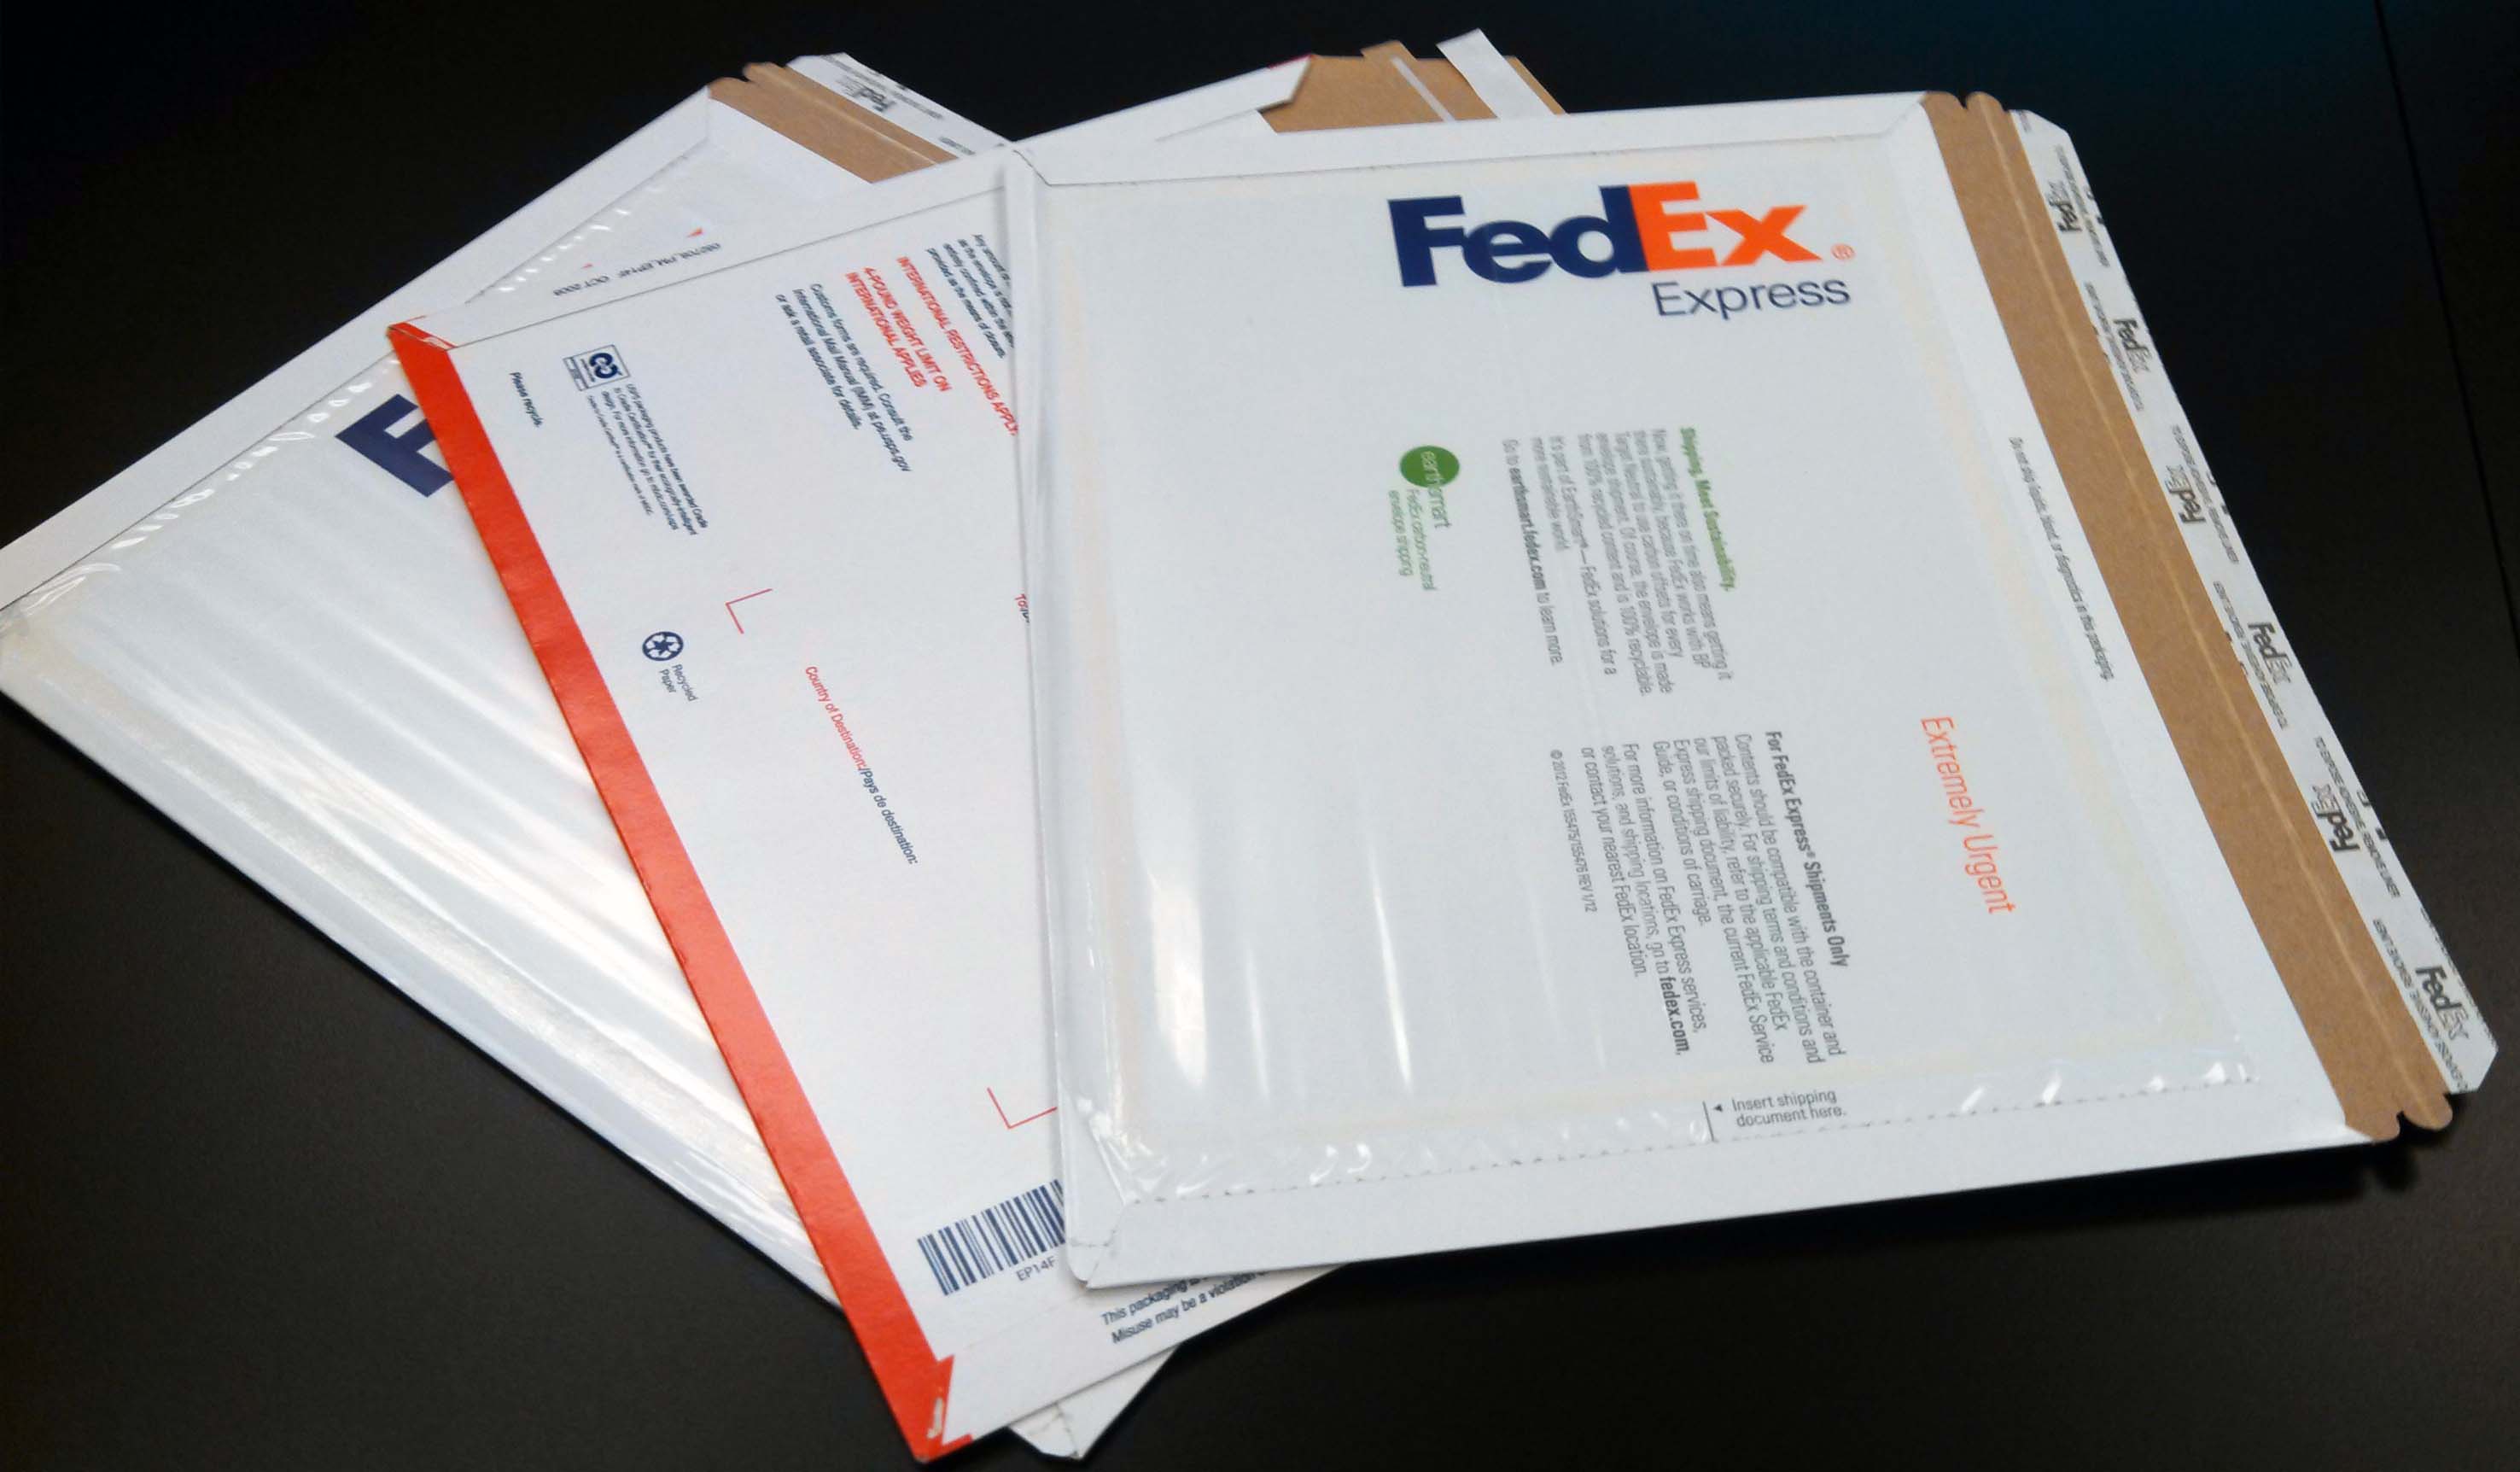 fedex-envelope-how-to-attach-fedex-label-to-envelope-there-are